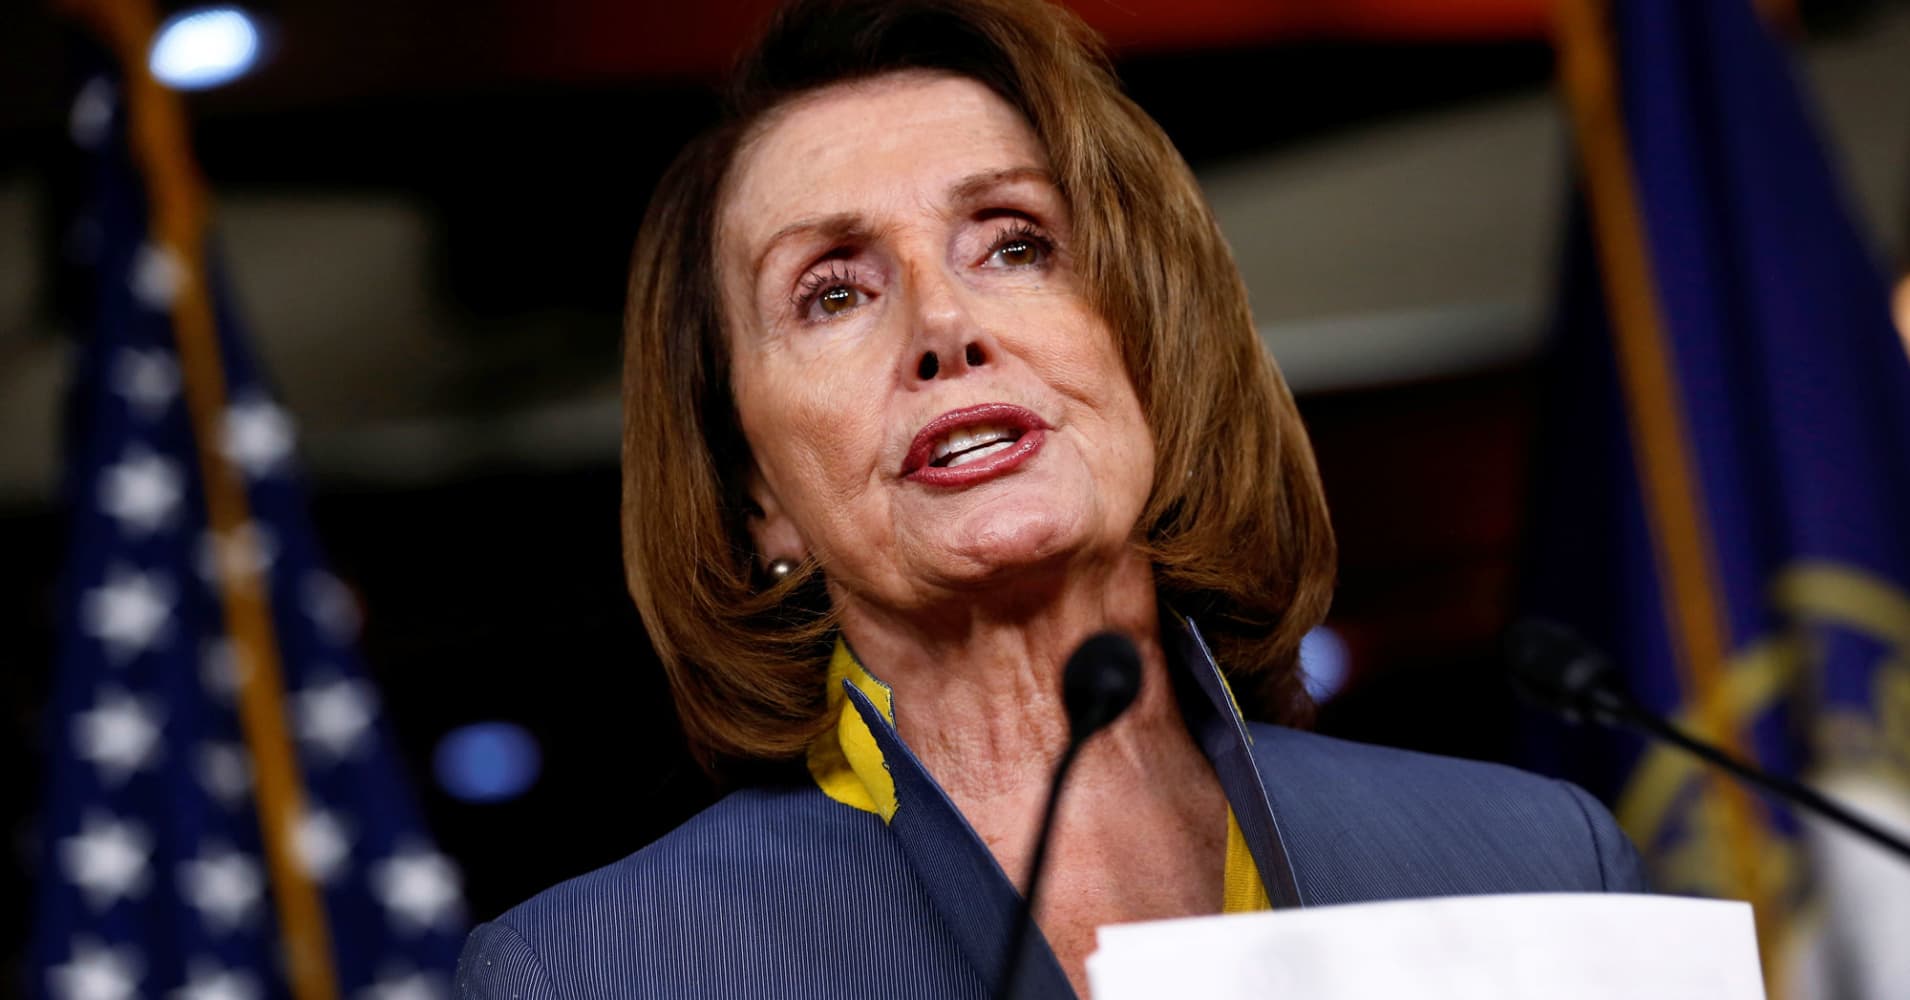 Watch: House Democratic leader Pelosi holds weekly news conference